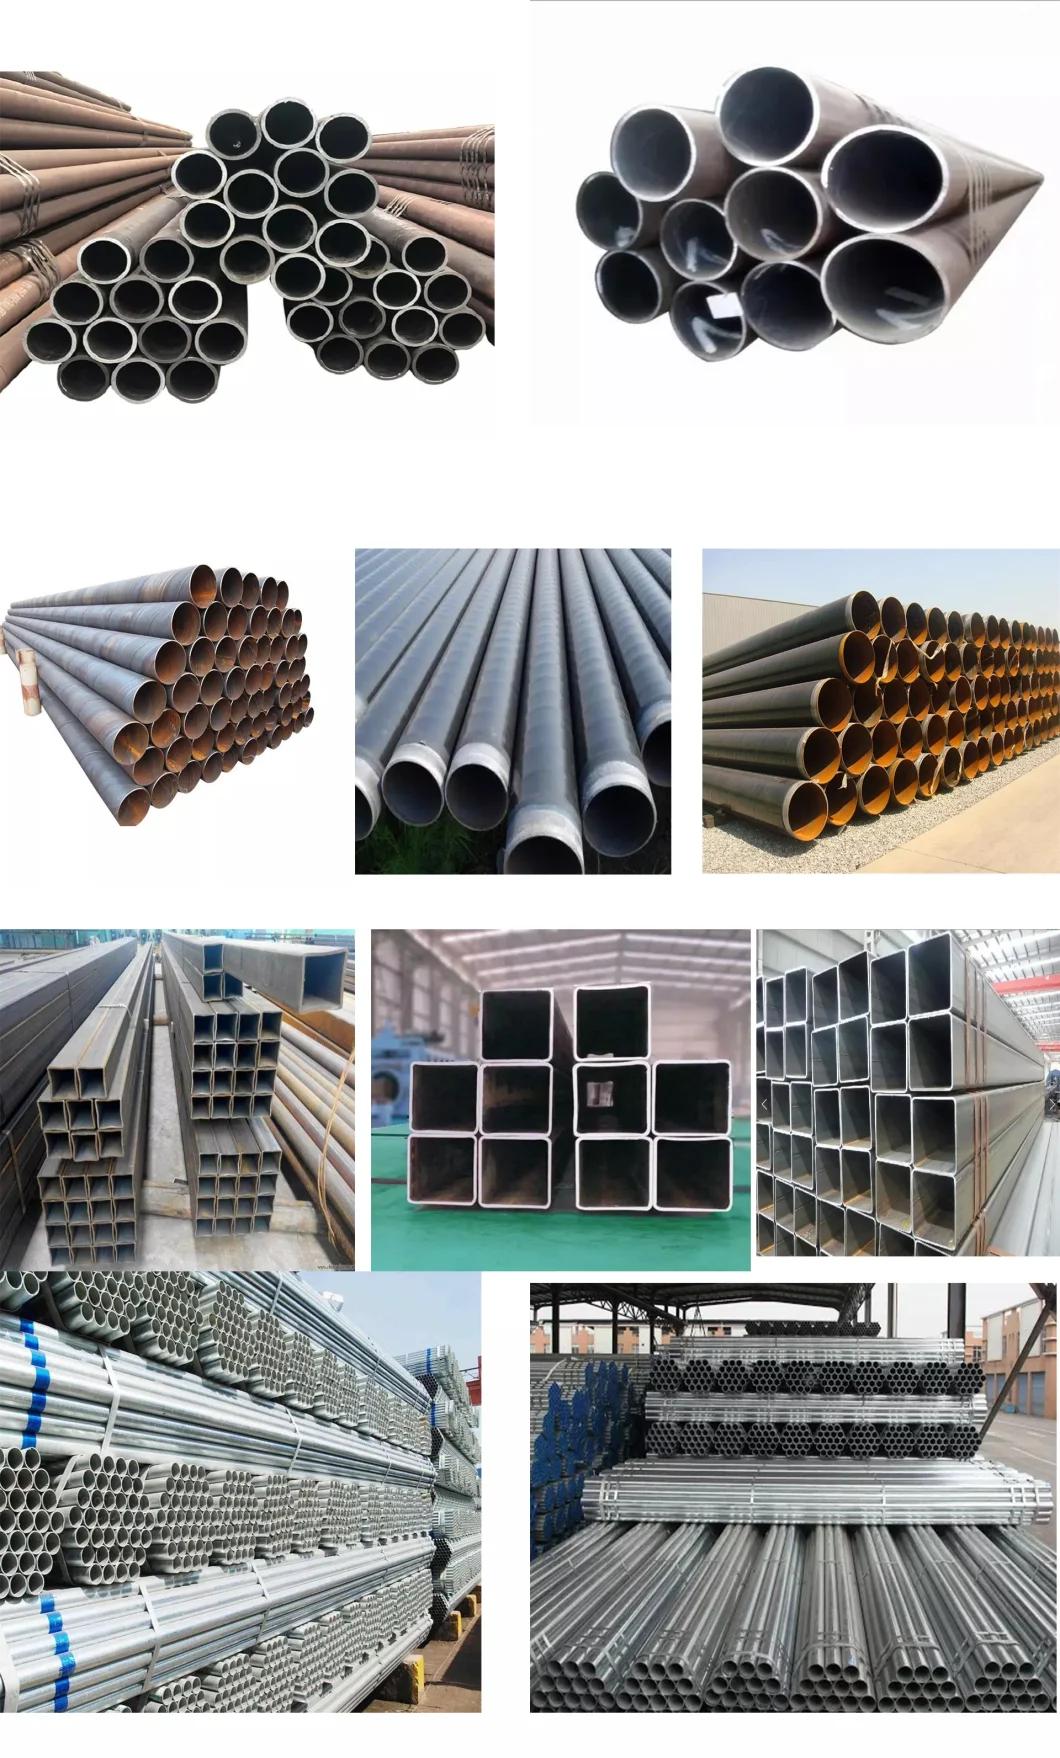 Hot Rolled Ss400 Scm420 Scm440 Ss400 S45c S35c Sts480 Carbon Steel Seamless Pipe